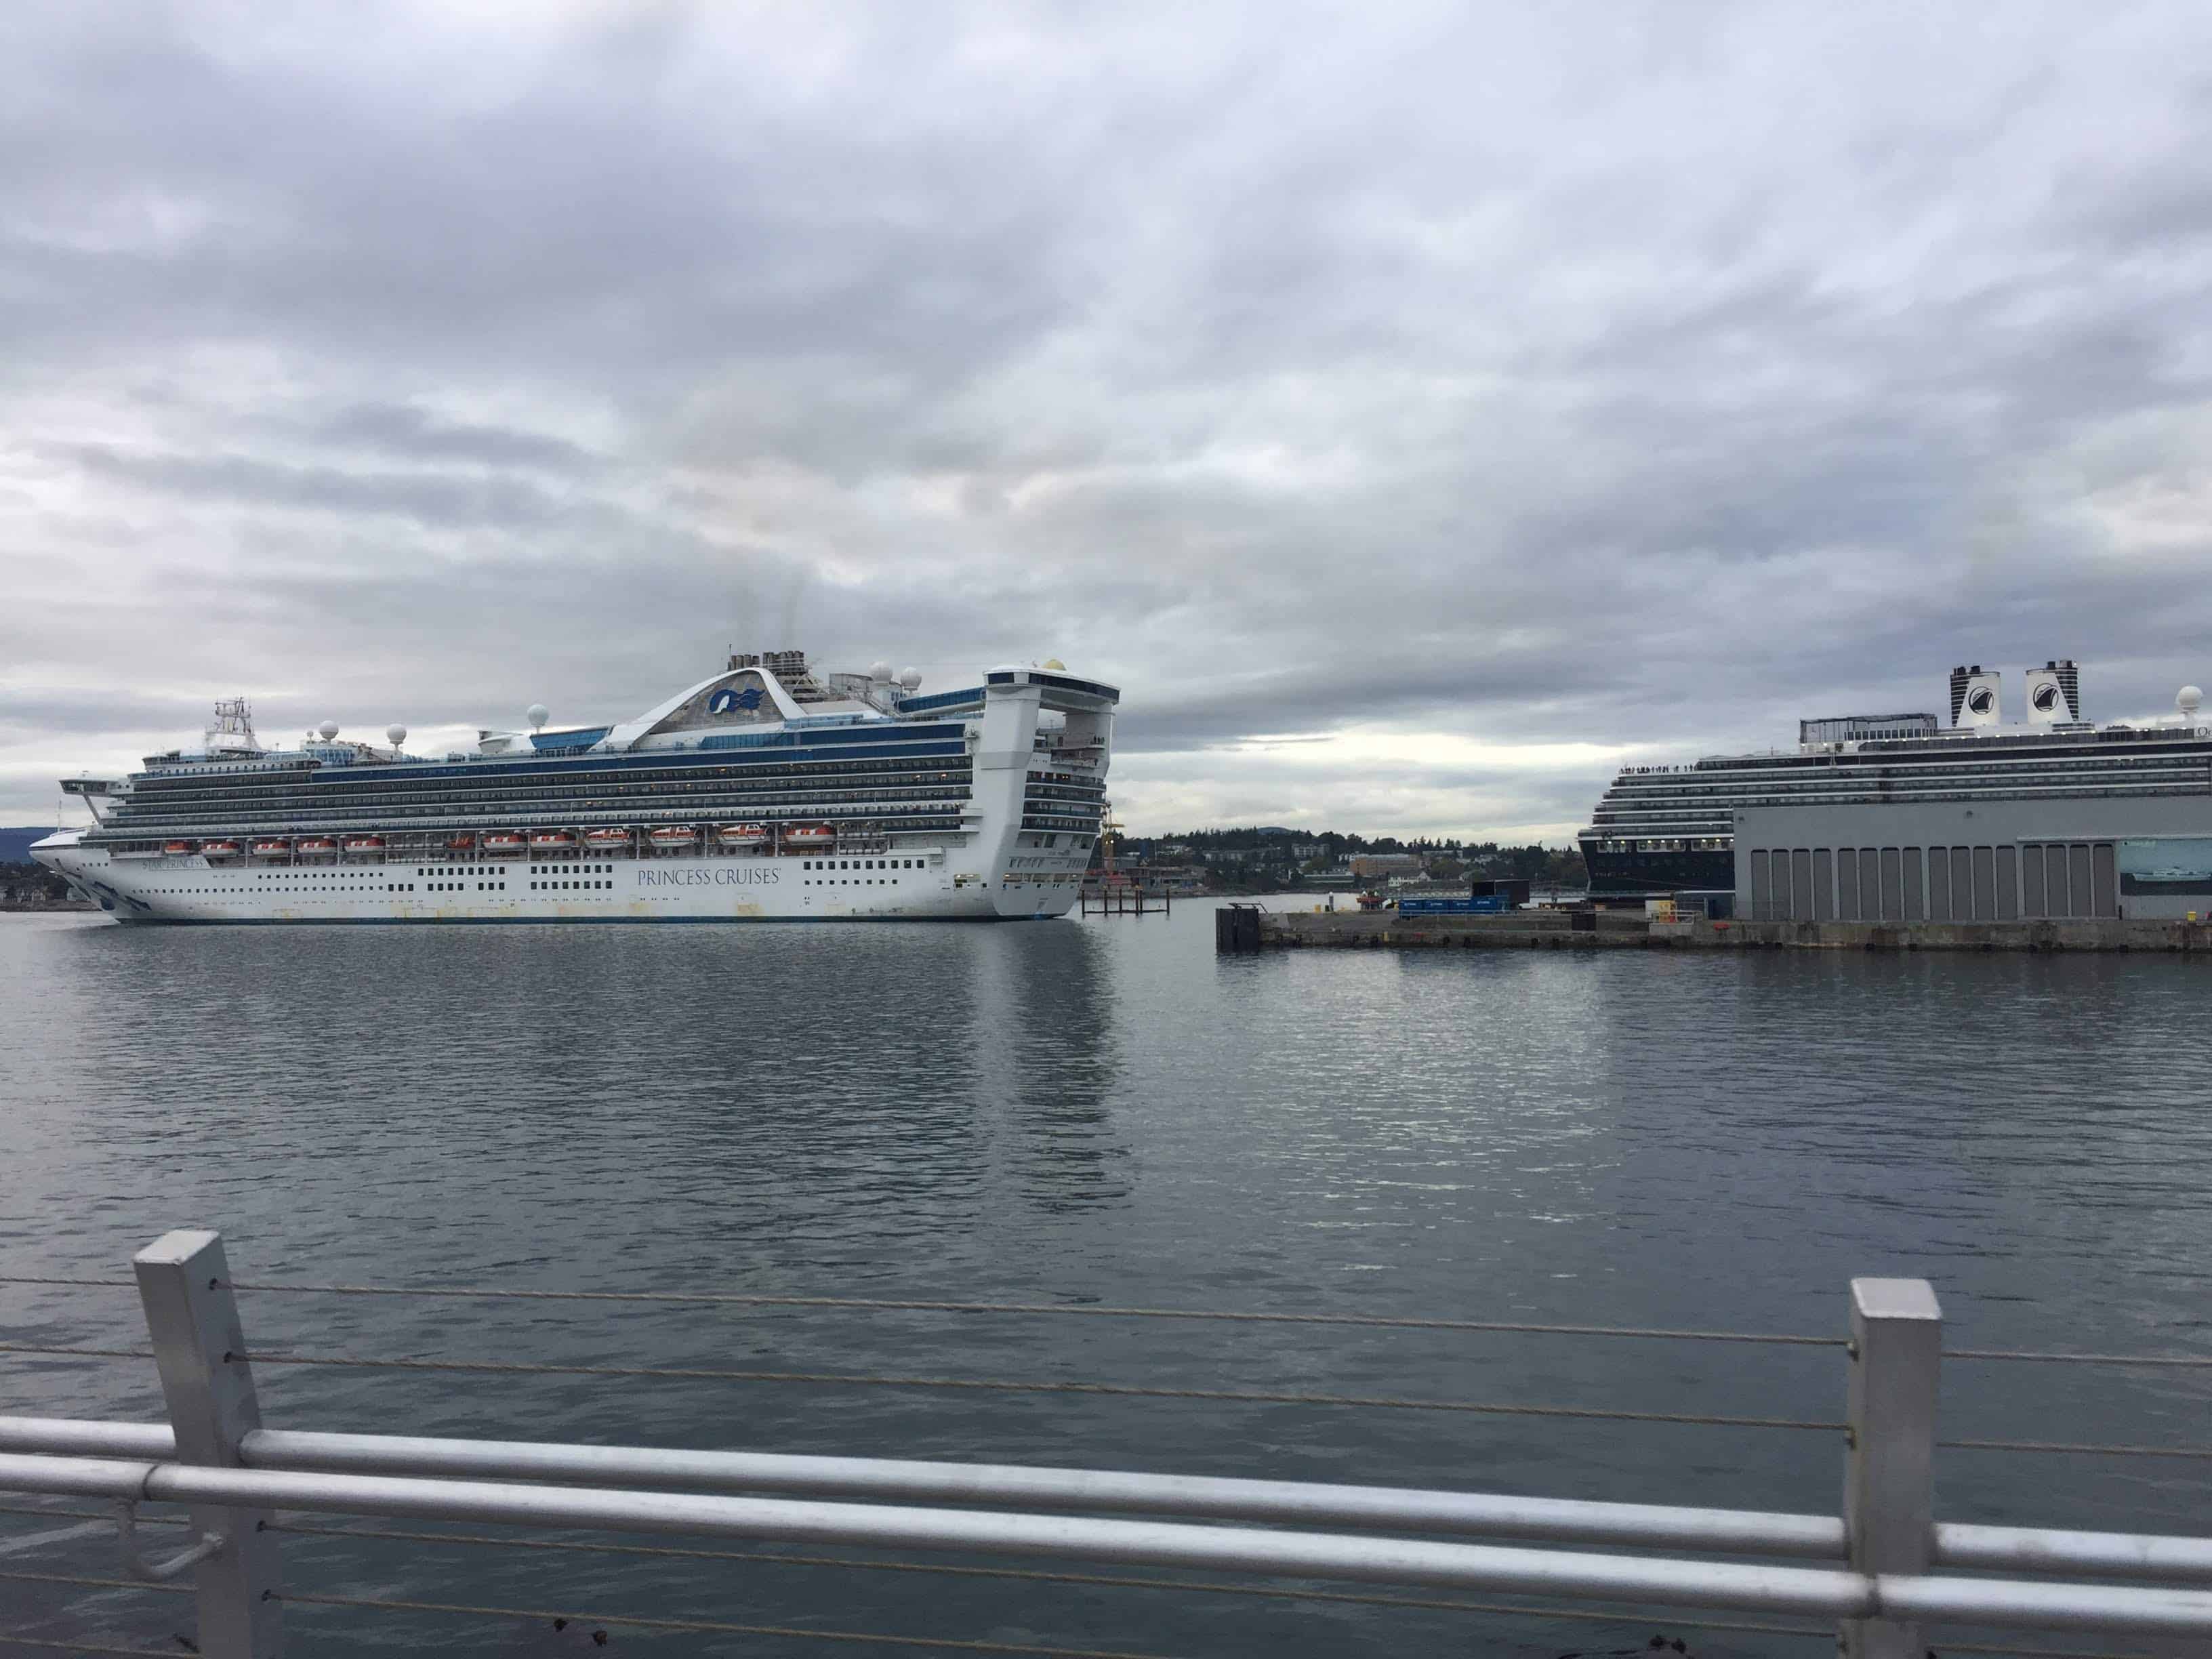 Watching from the Breakwater at Ogden Point as a cruise ship arrives